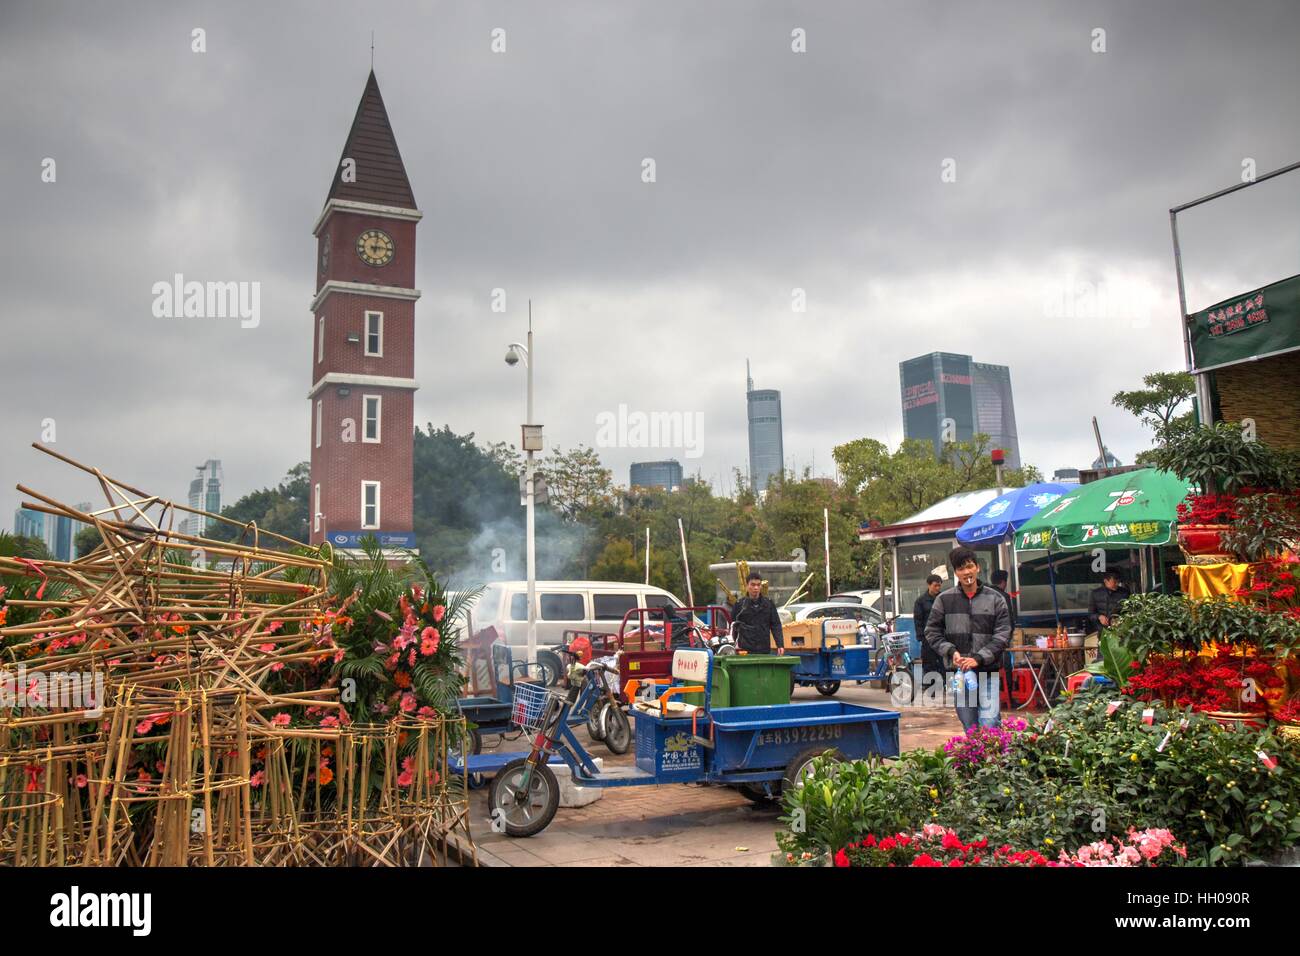 This is a moody picture of the beautiful Shenzhen Flower Trade Market  with the clock tower in the background.  Shenzhen, China Stock Photo